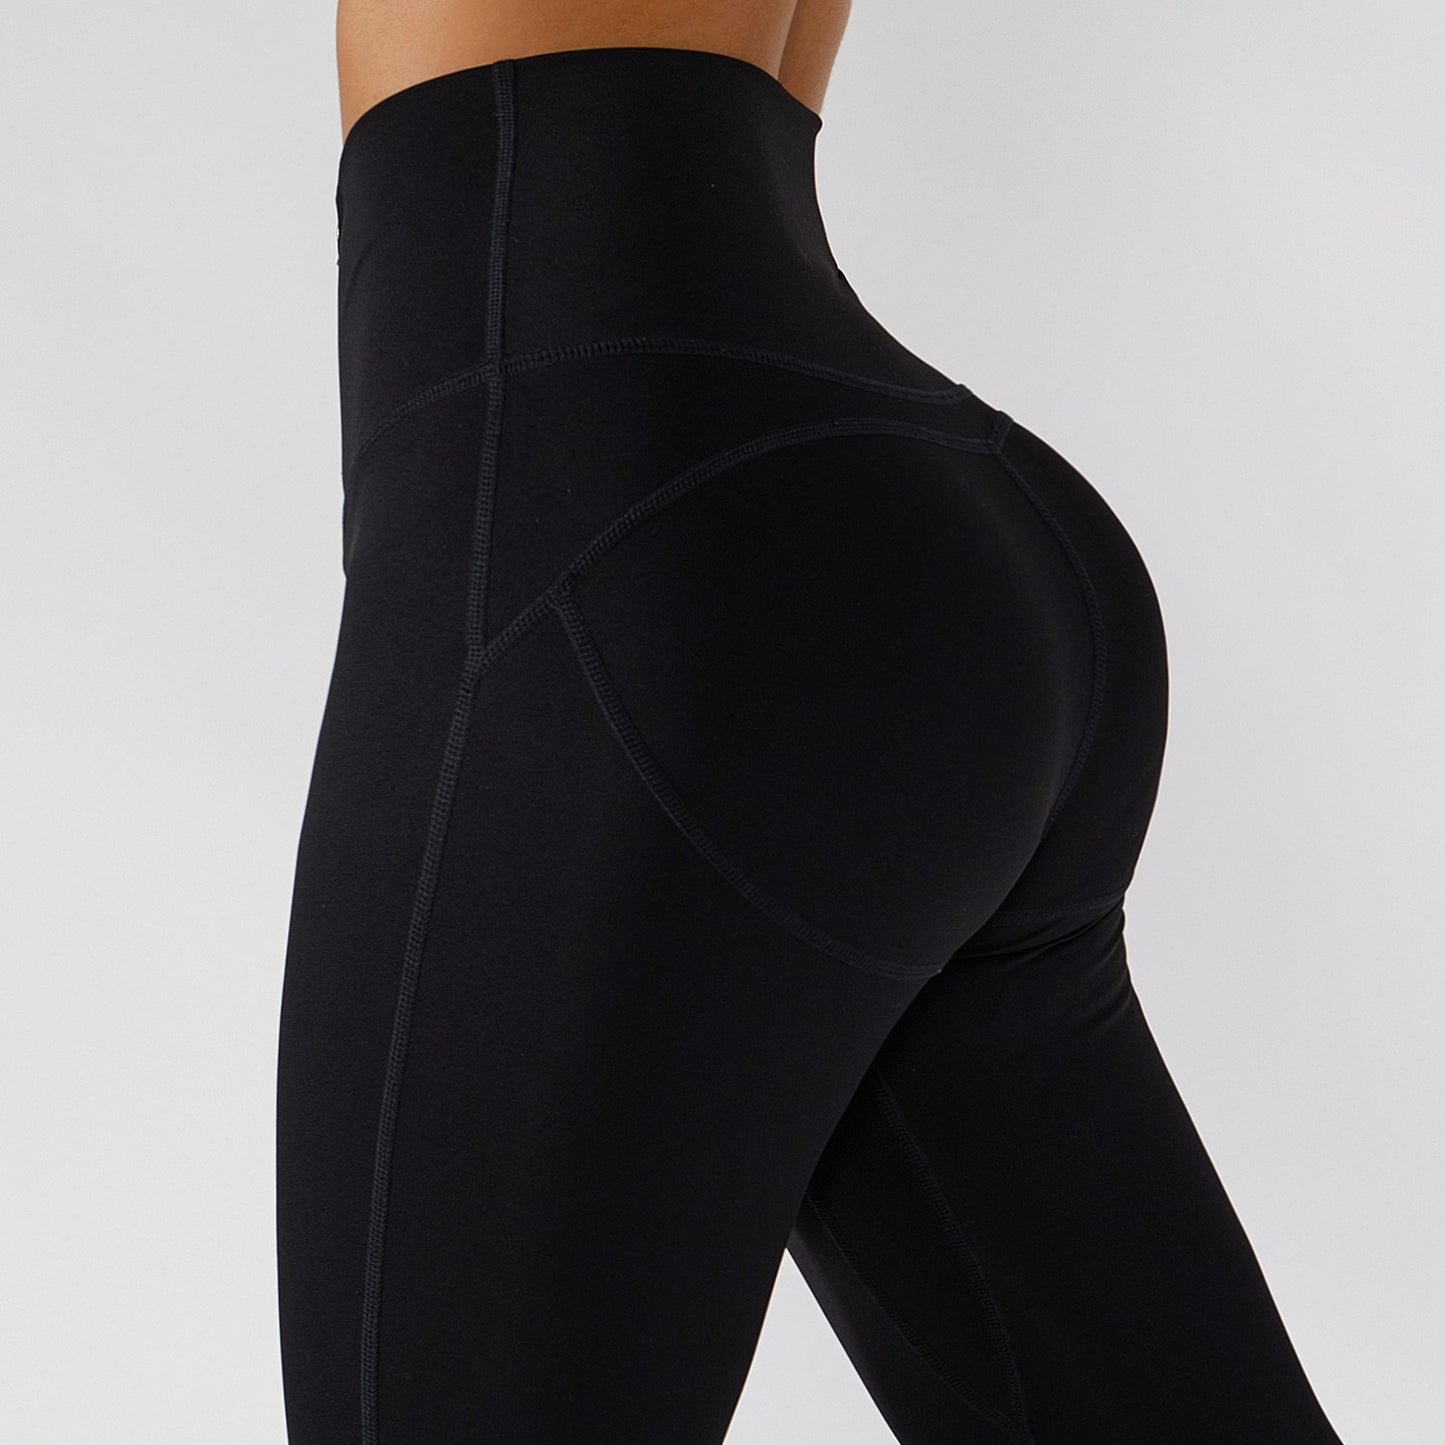 Black Fit clothing for women